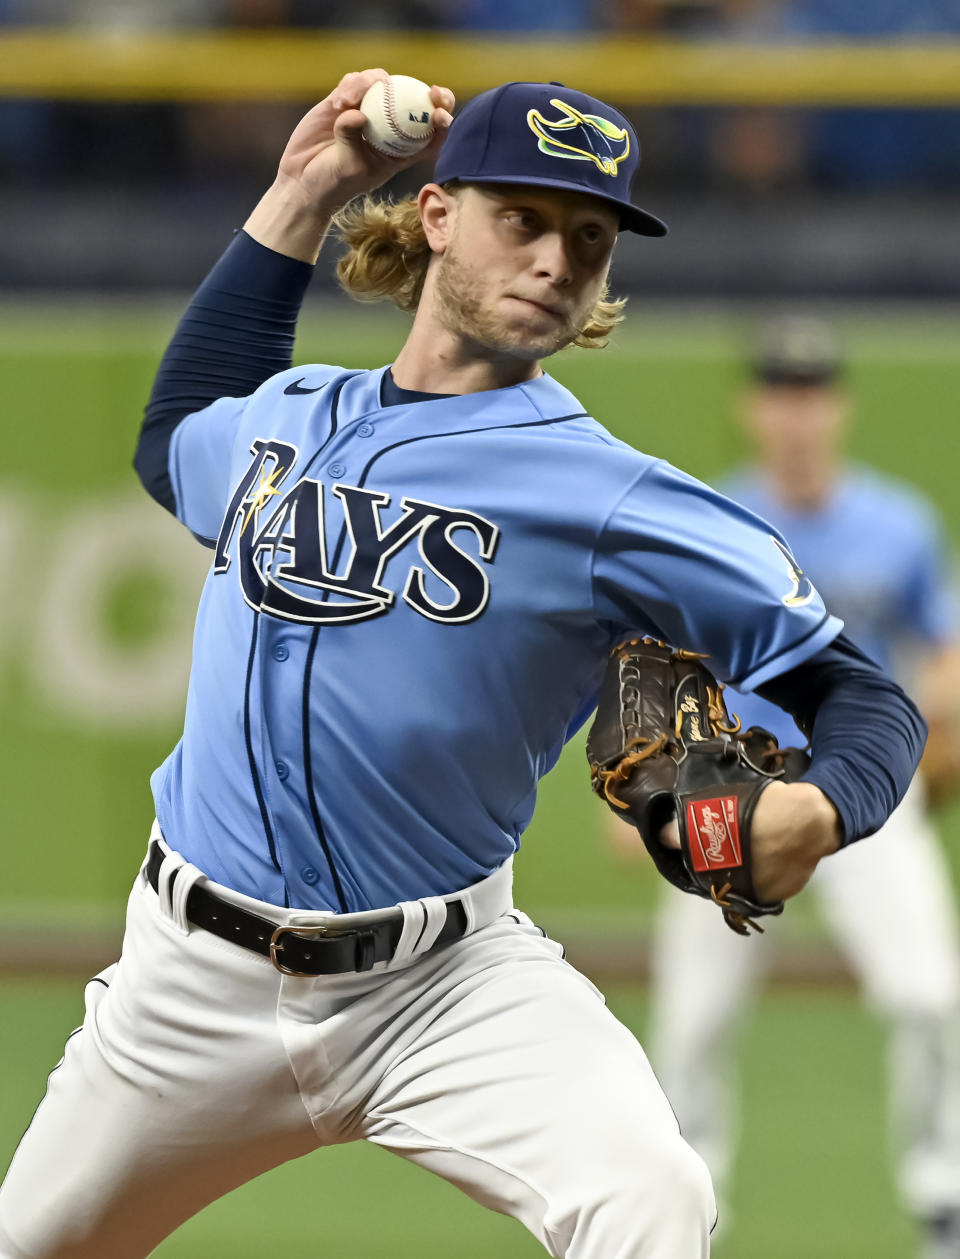 Tampa Bay Rays starter Shane Baz pitches against the Miami Marlins during the first inning of a baseball game Sunday, Sept. 26, 2021, in St. Petersburg, Fla. (AP Photo/Steve Nesius)